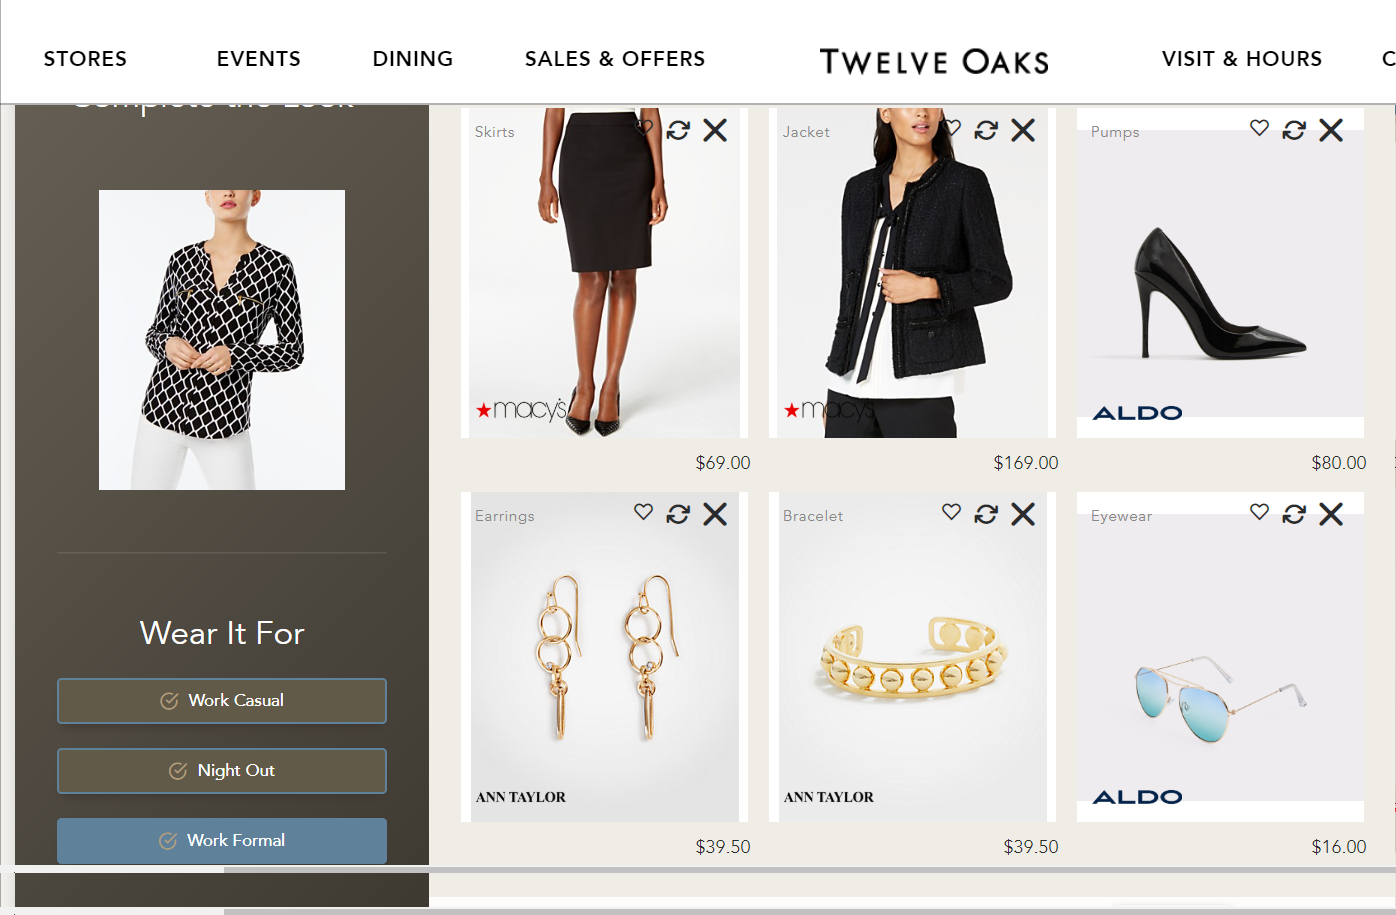 Shoptelligence Launches AI-Powered Style Assistant - Shoptelligence